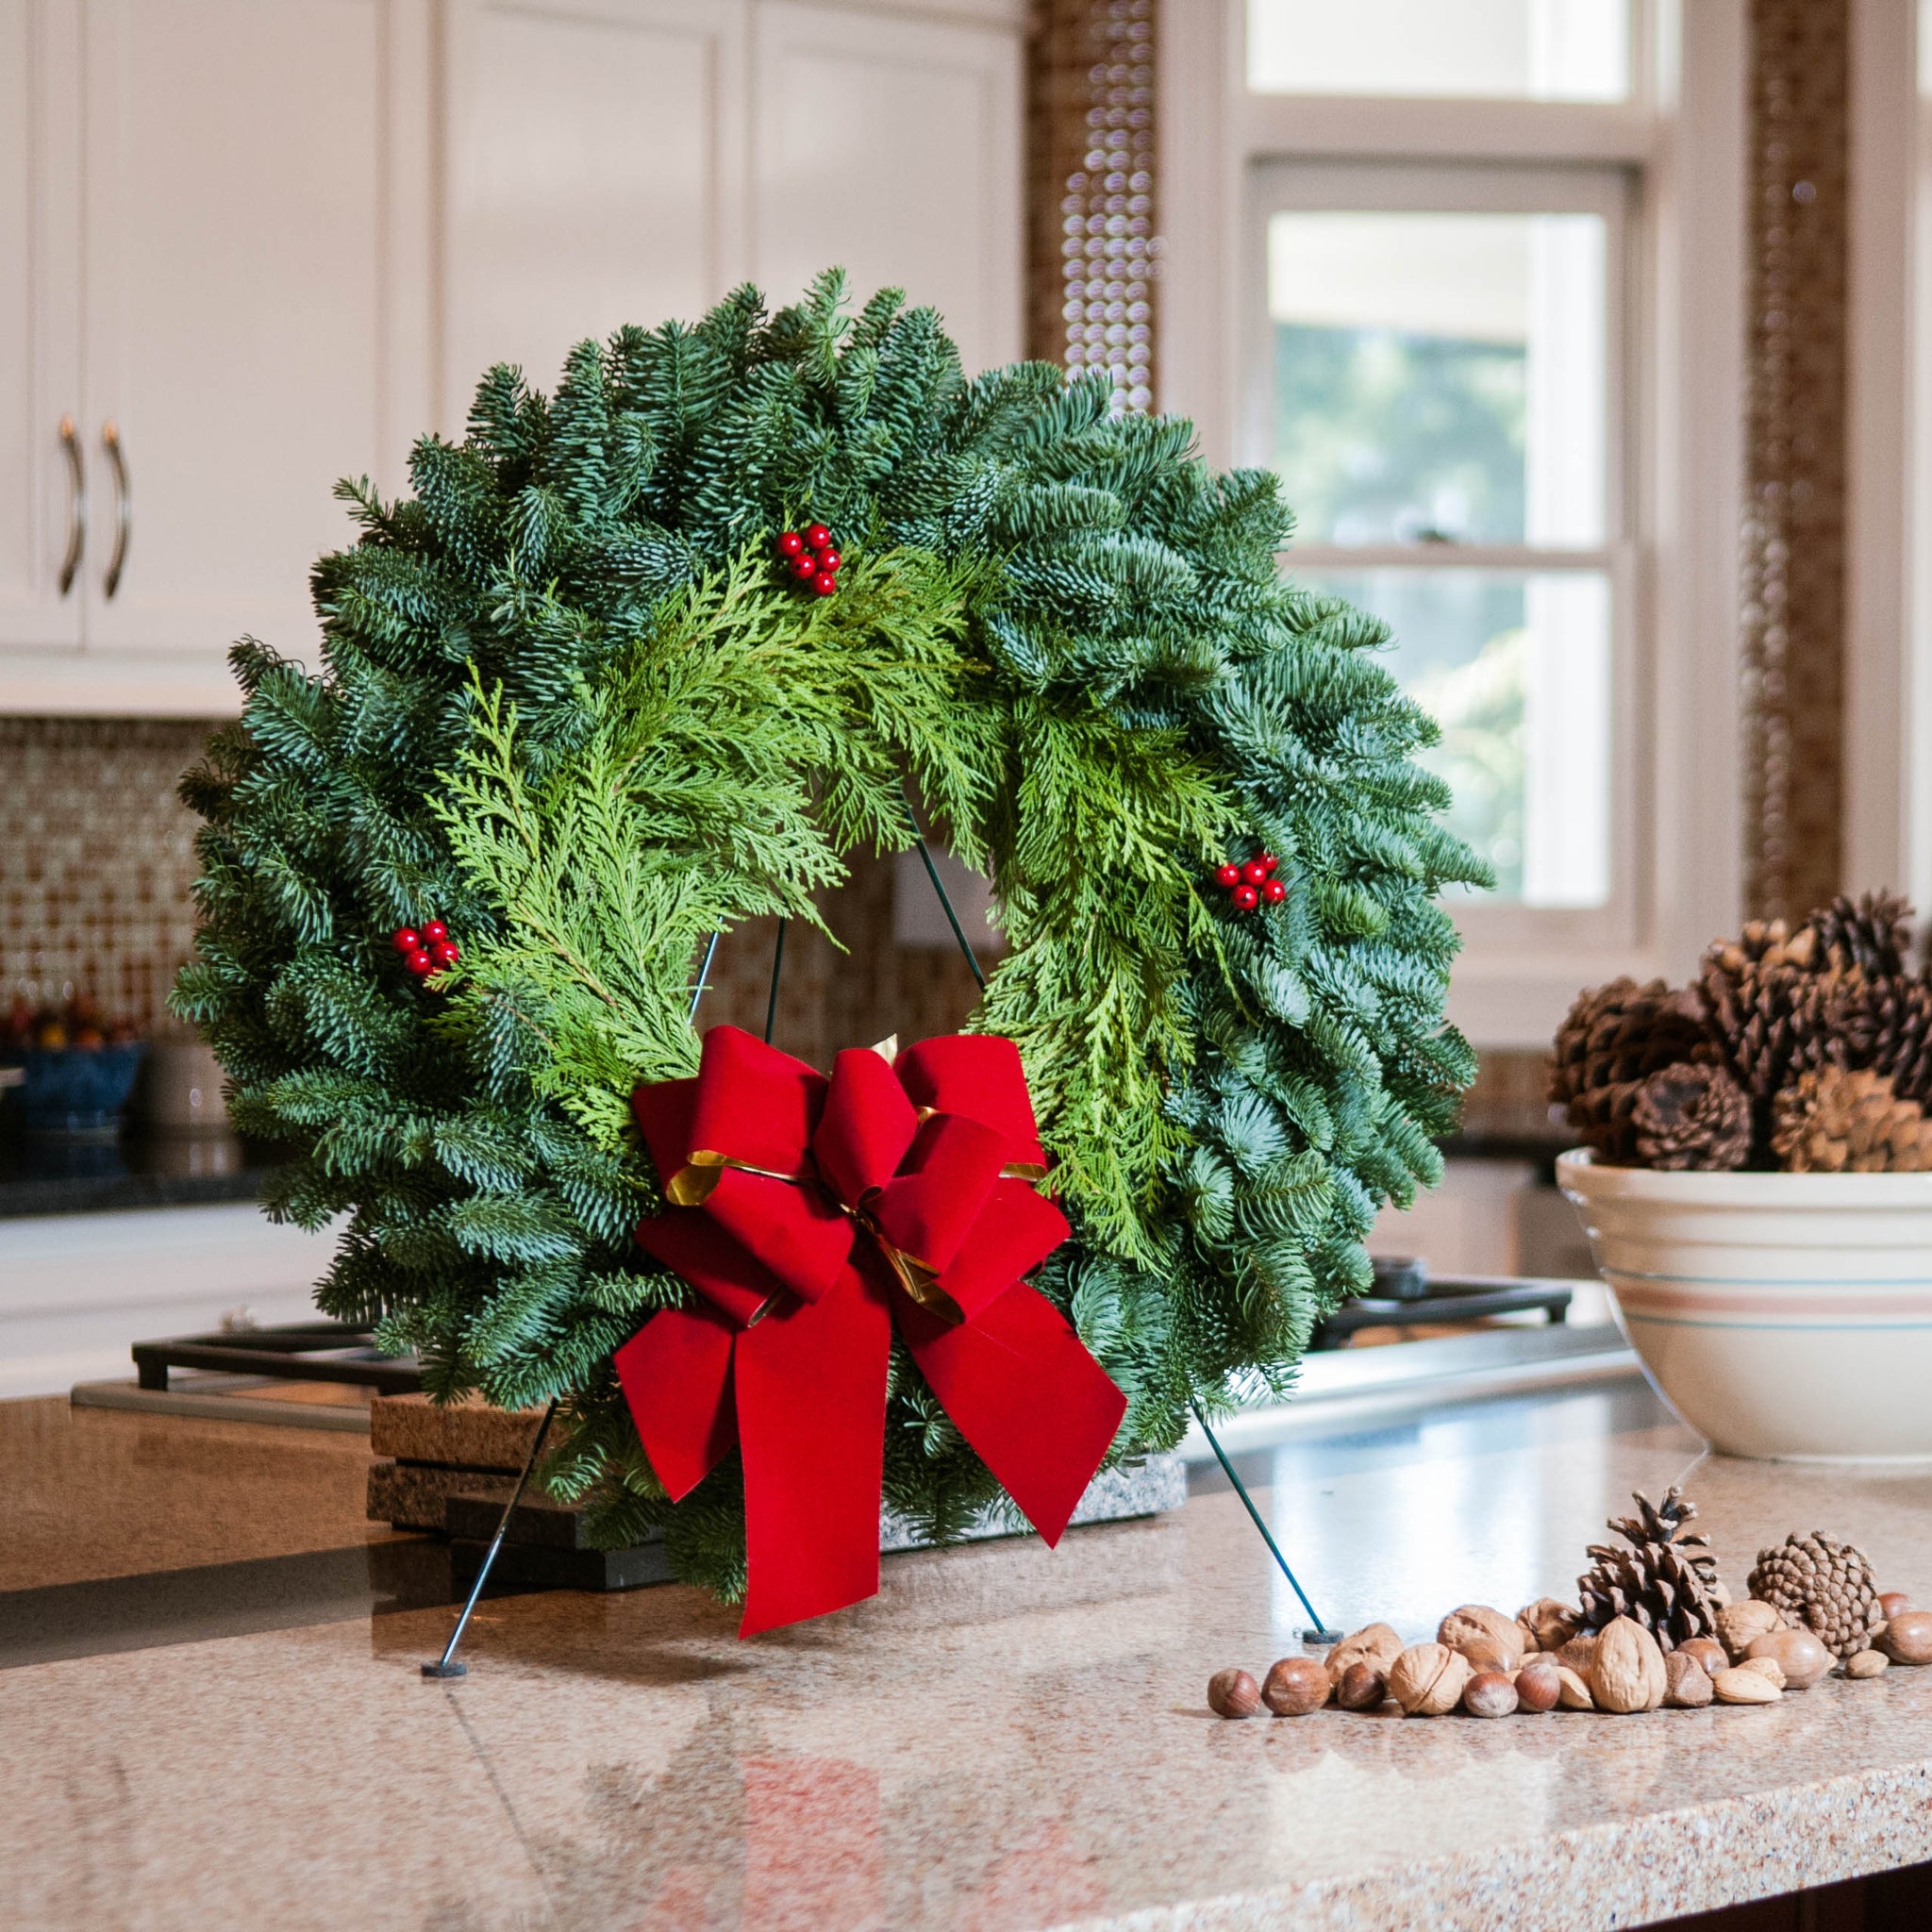 Christmas wreath of fir and cedar with three red berry clusters and a gold-backed red velveteen bow on kitchen counter